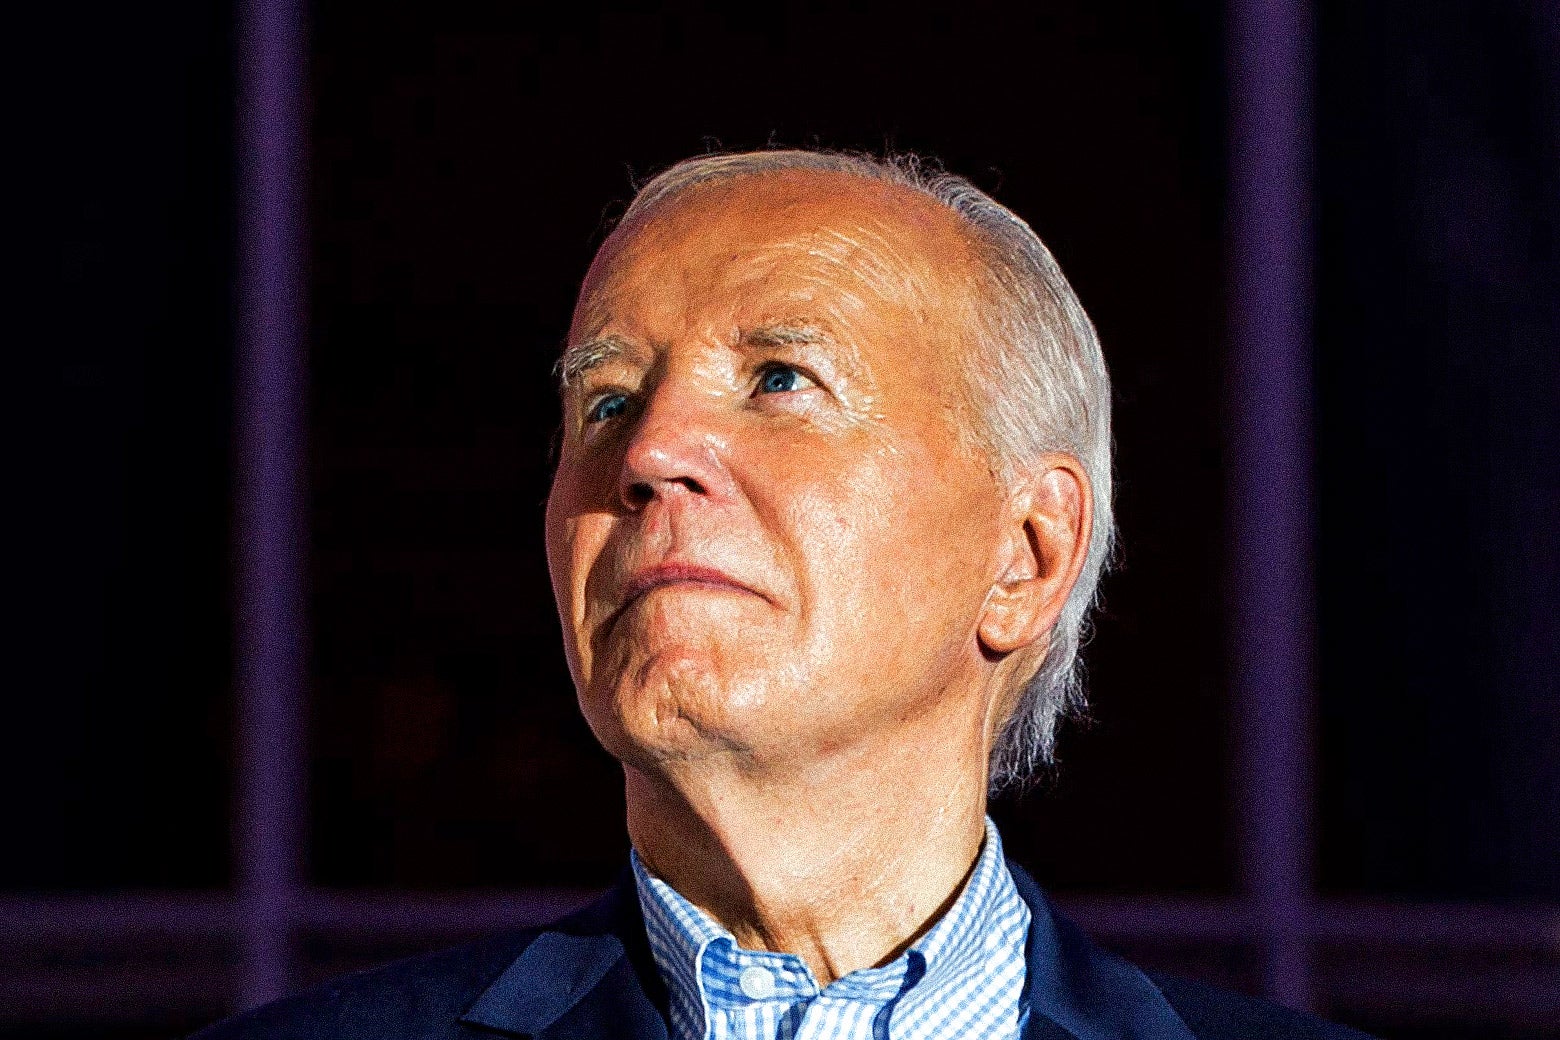 Biden Is Out of the Race. Here’s What We Know.